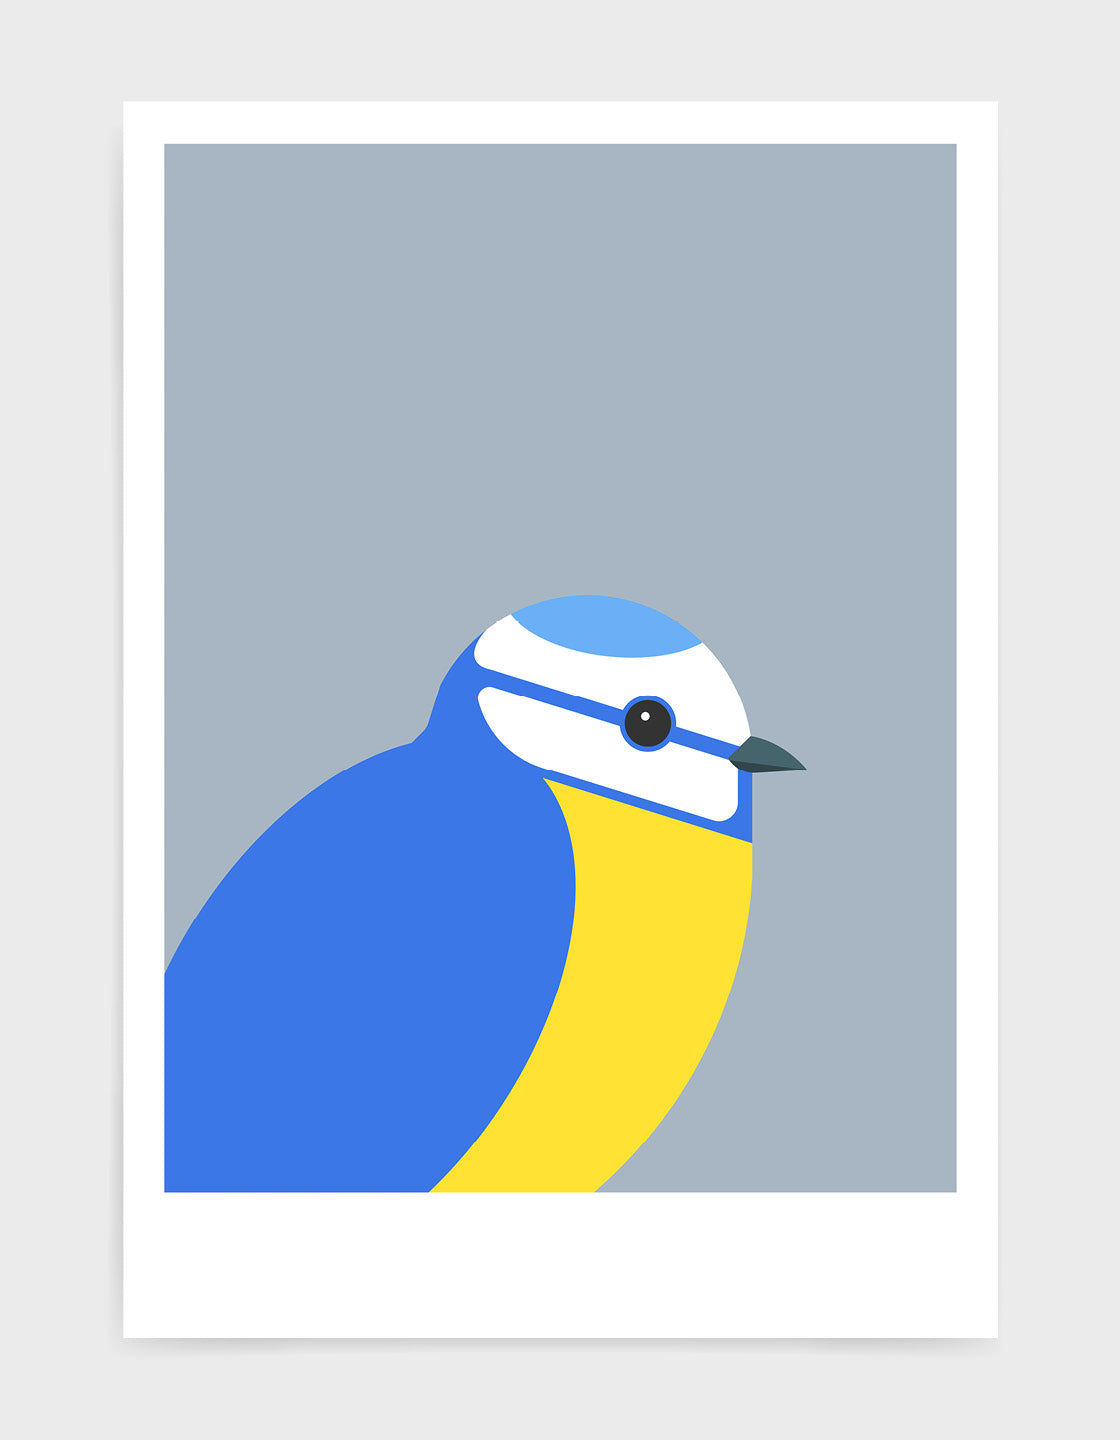 illustration of a blue tit bird against a grey background